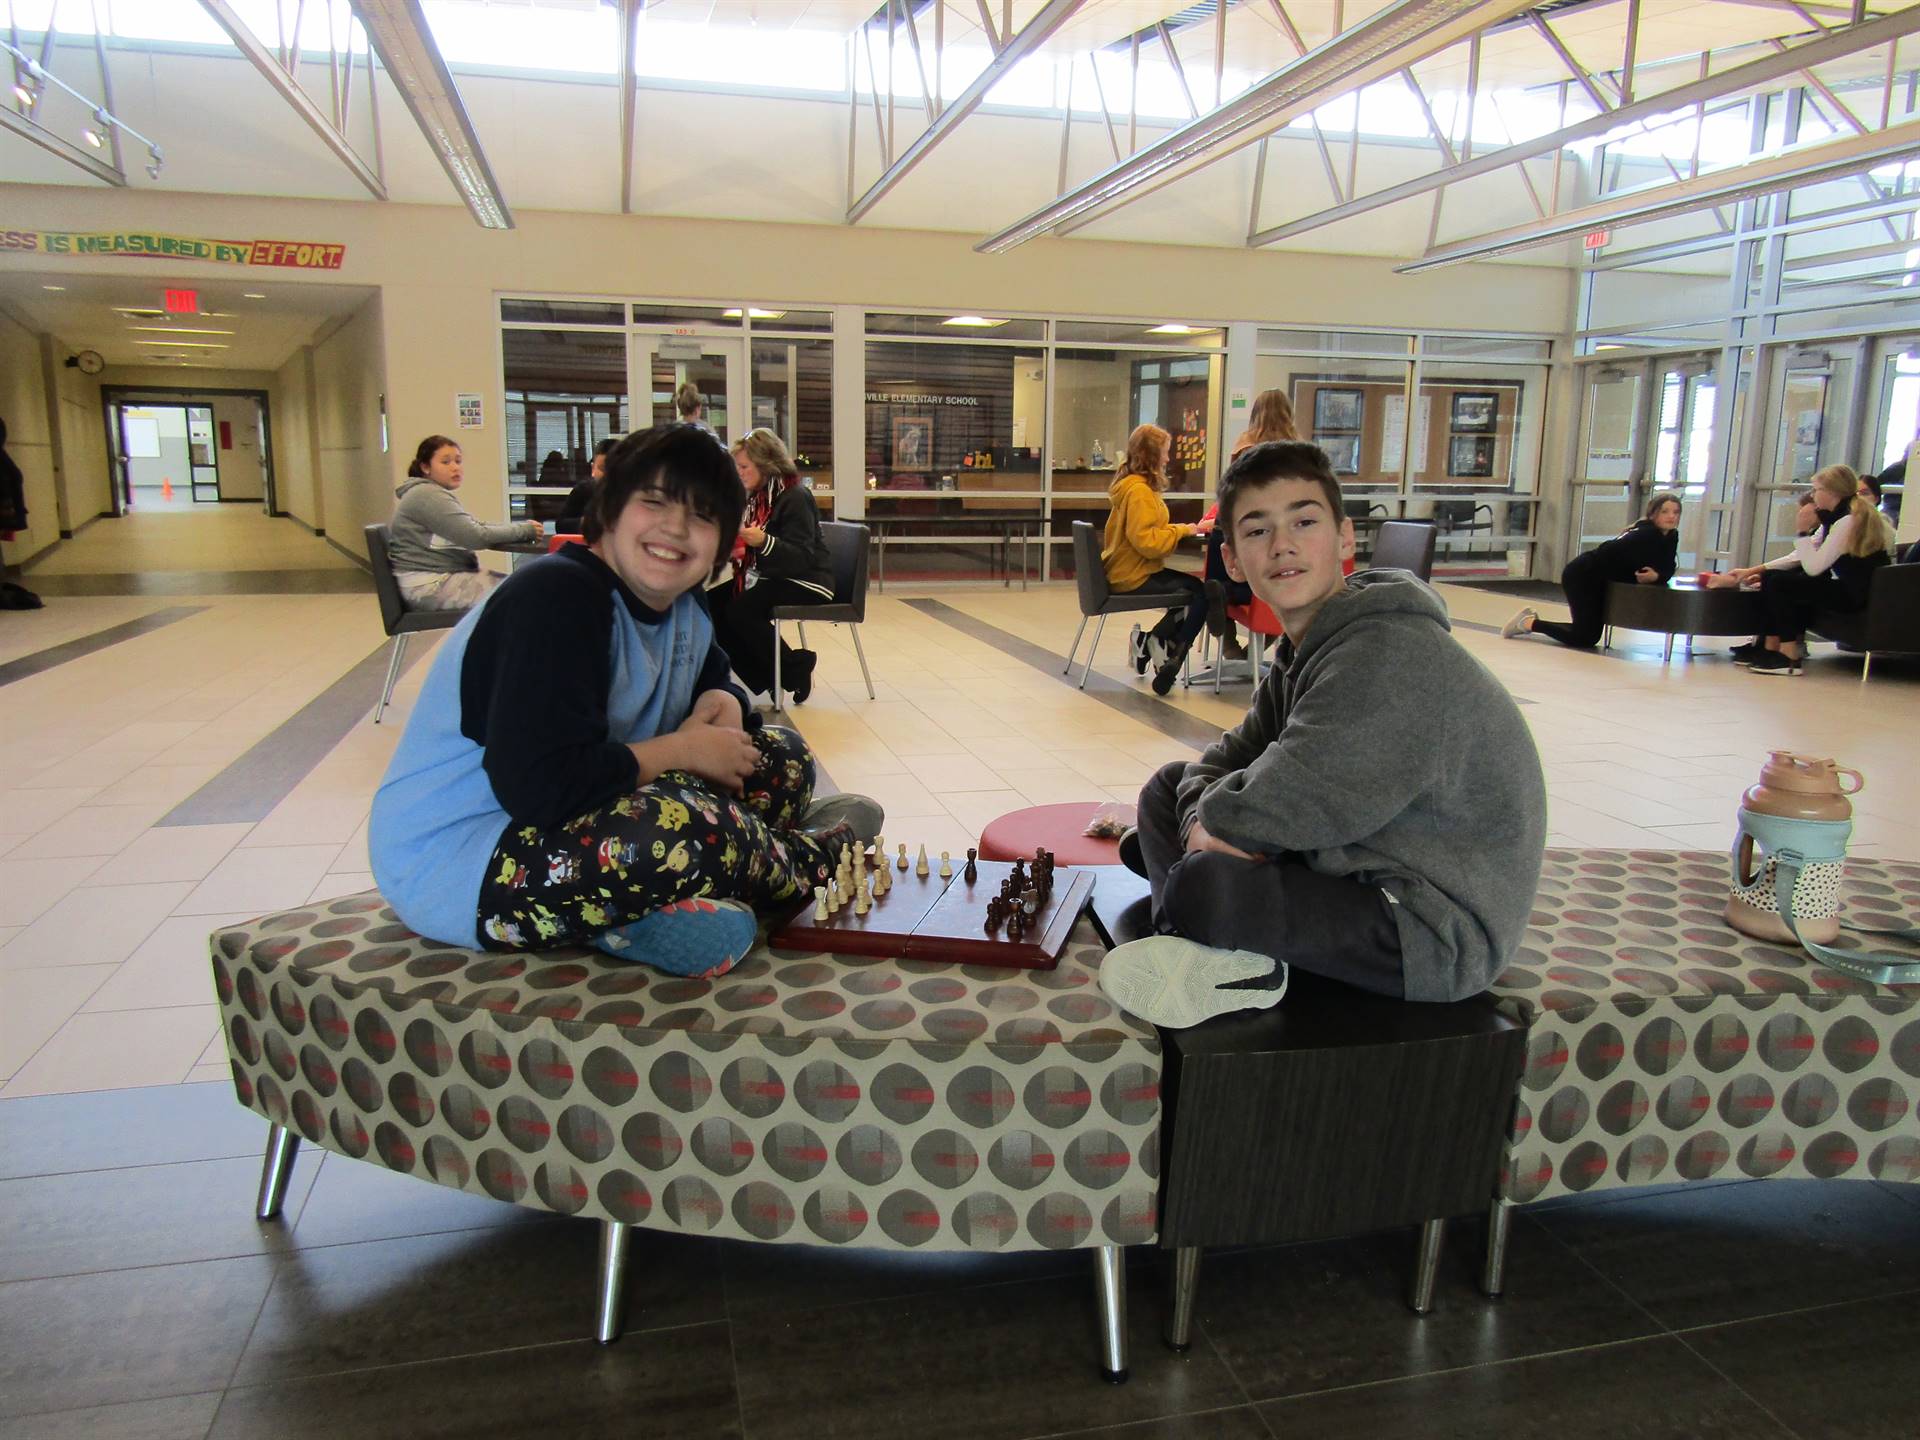 5th graders playing chess during indoor recess